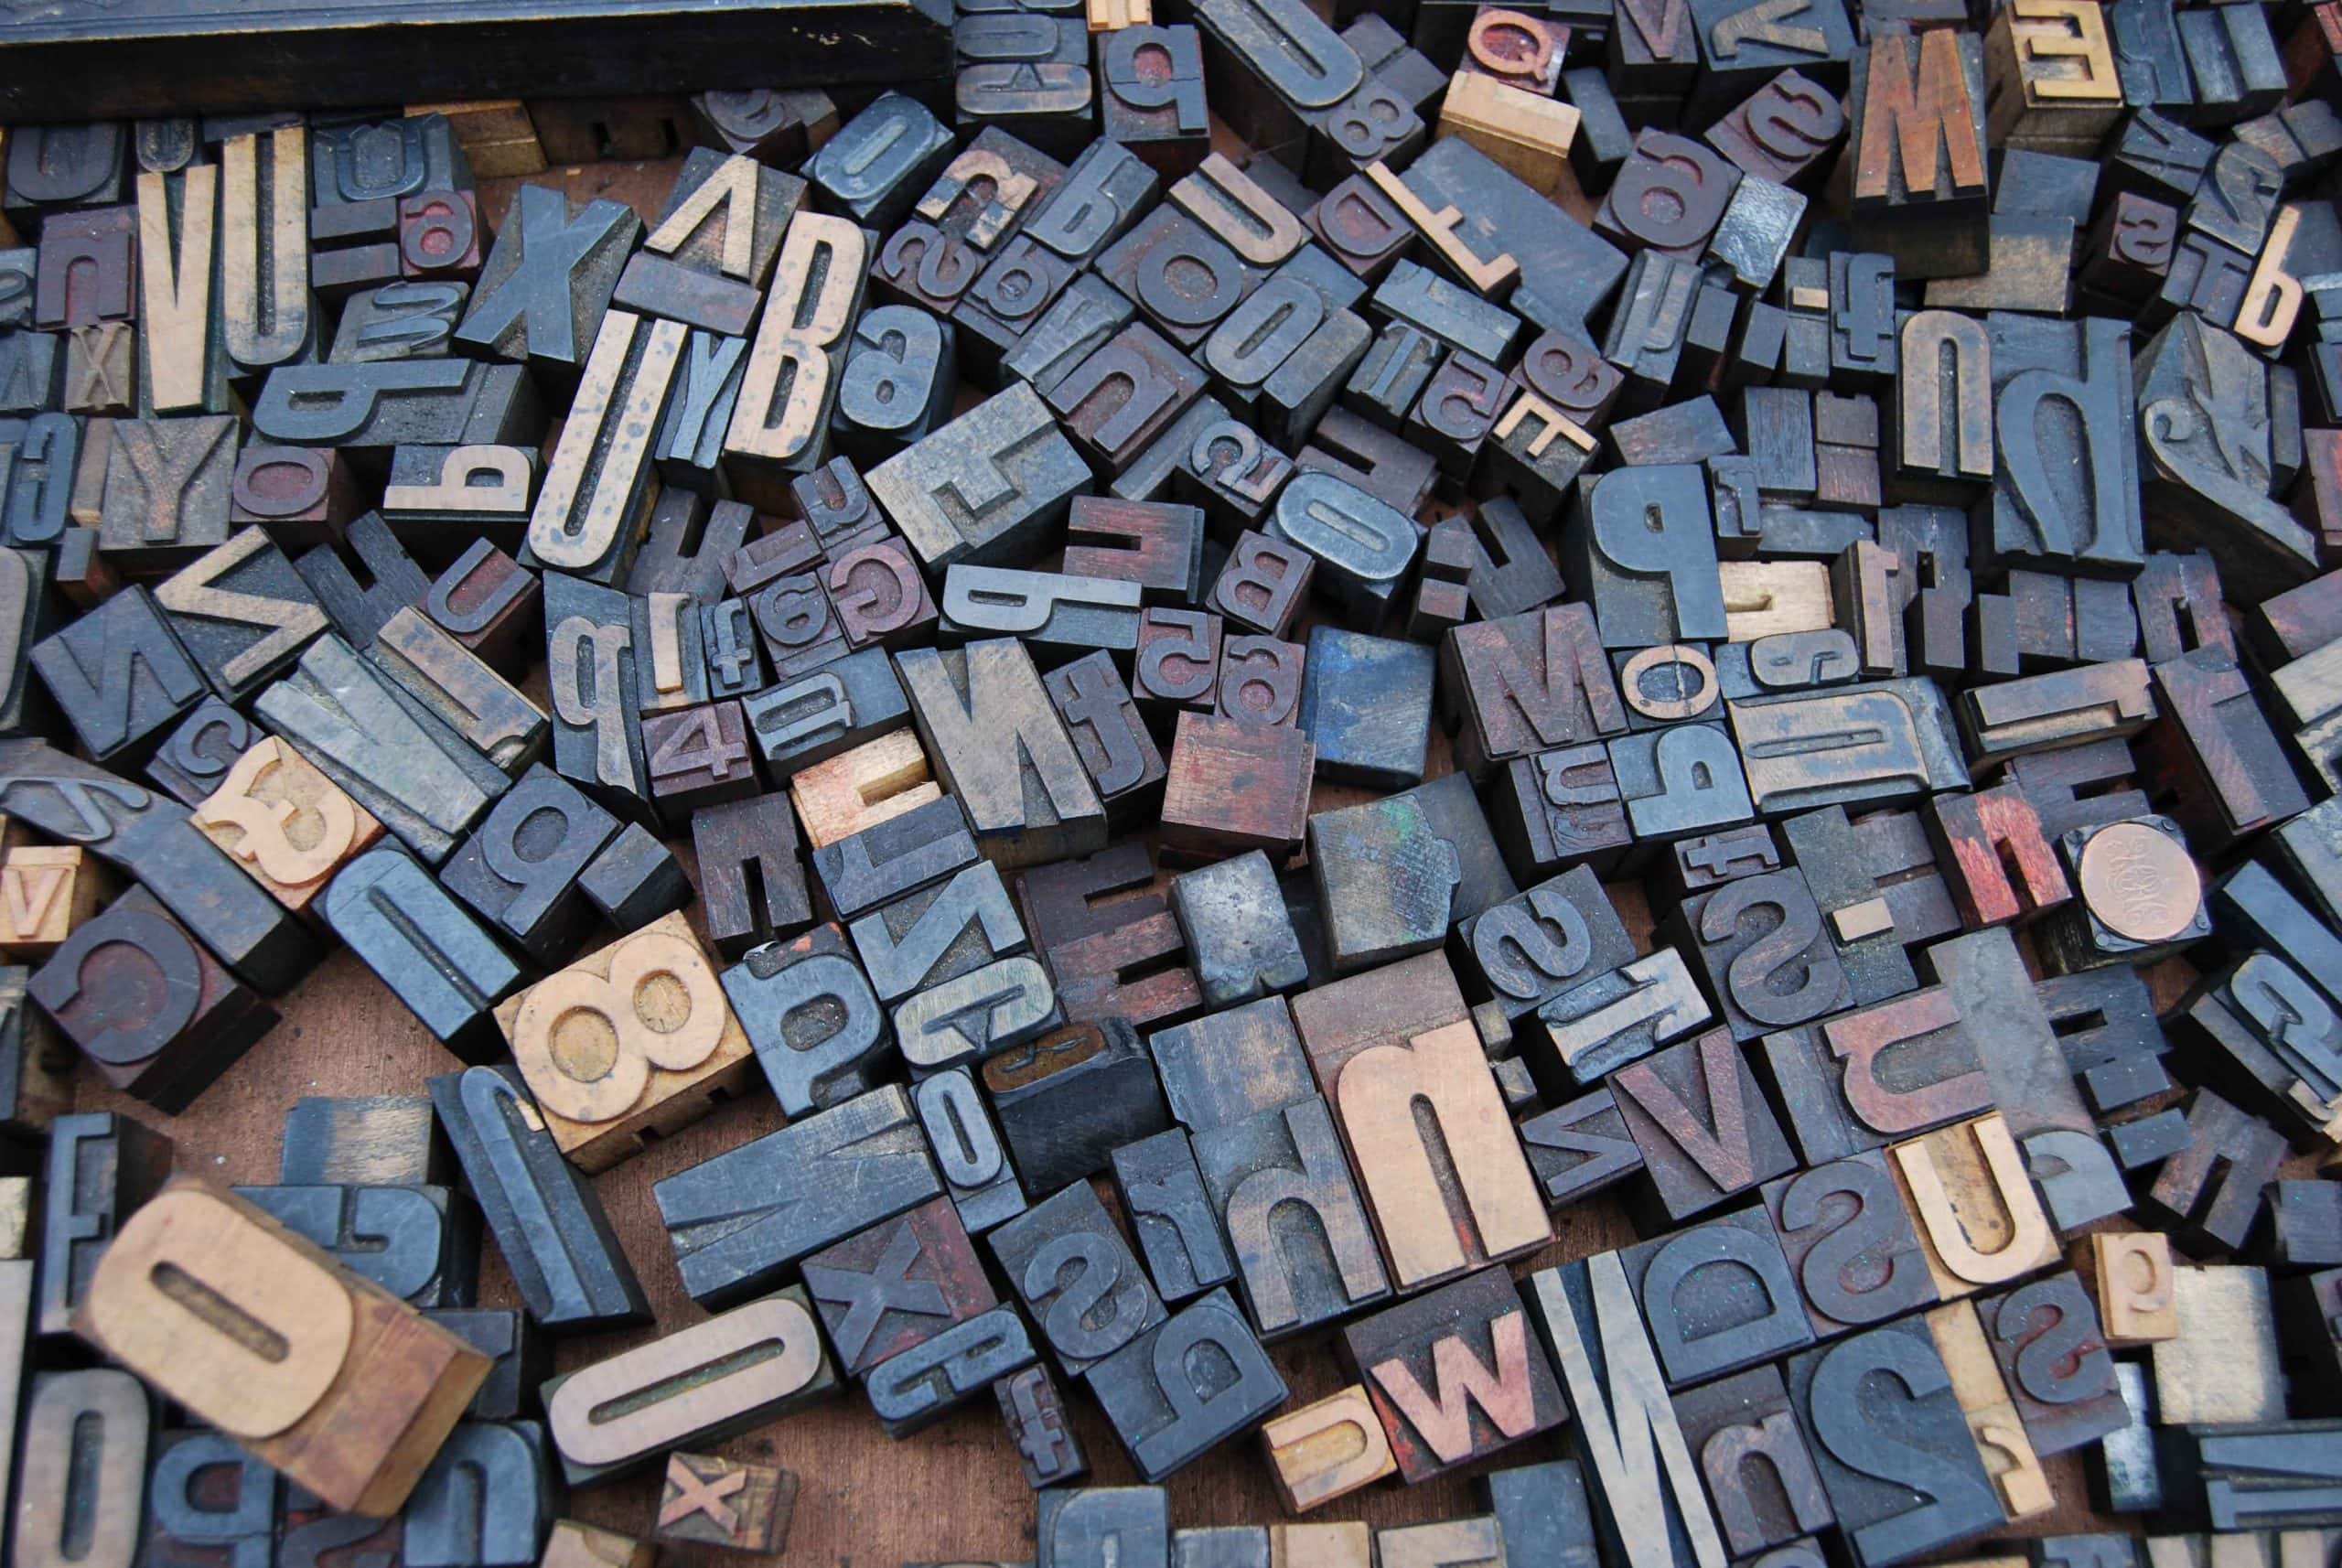 Image of a pile of letter and number stamps. They form no words, just randomly placed.